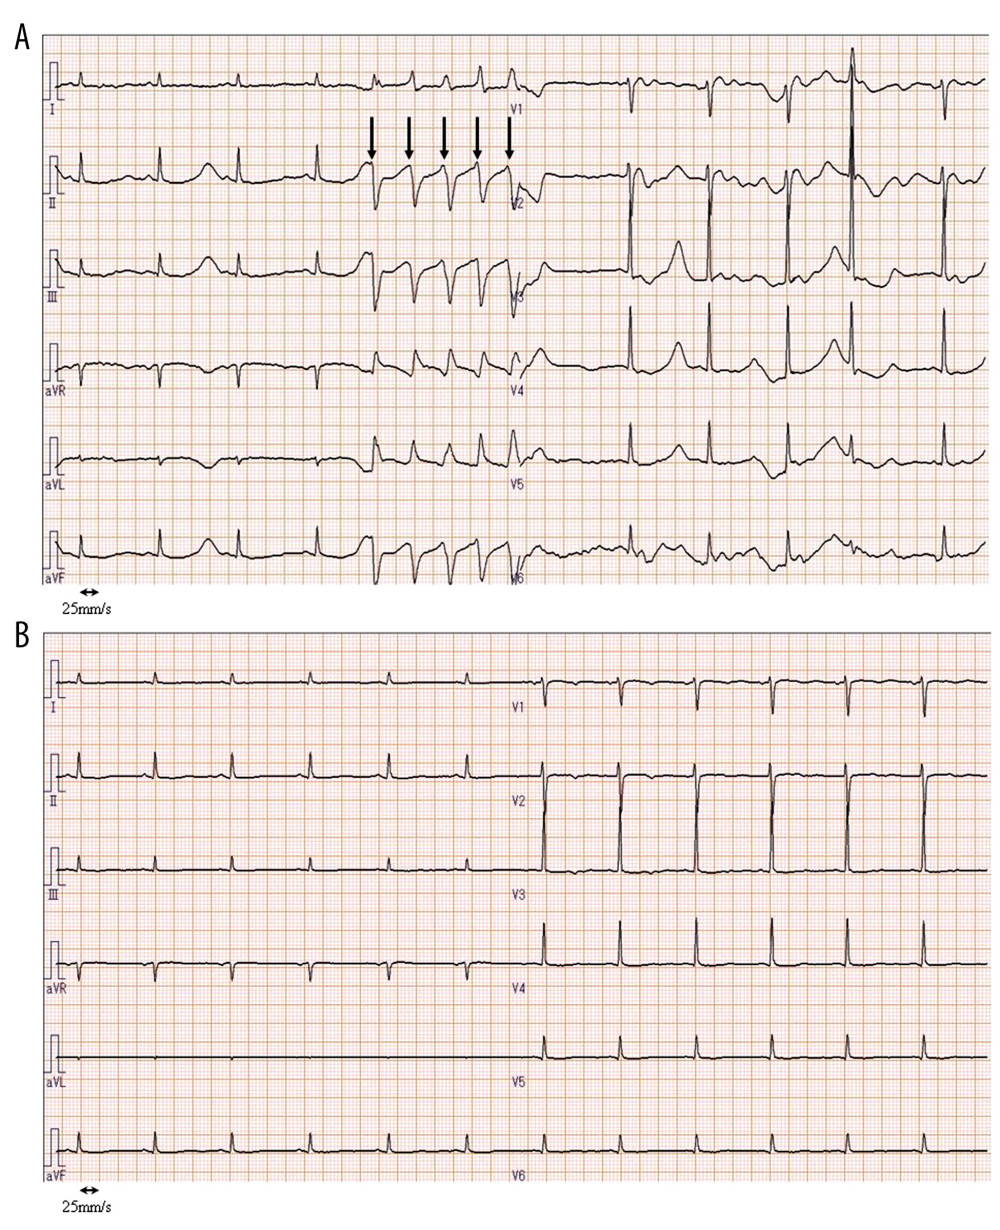 (A) An episode of pulseless ventricular tachycardia (arrow, indicating abnormal electrocardiogram findings) with marked QTc prolongation developed 29 h after the administration of parenteral nutrition at a rate of 280 kcal/day (8.7 kcal/kg/day). (B) The 12-lead electrocardiogram on the second day after admission.